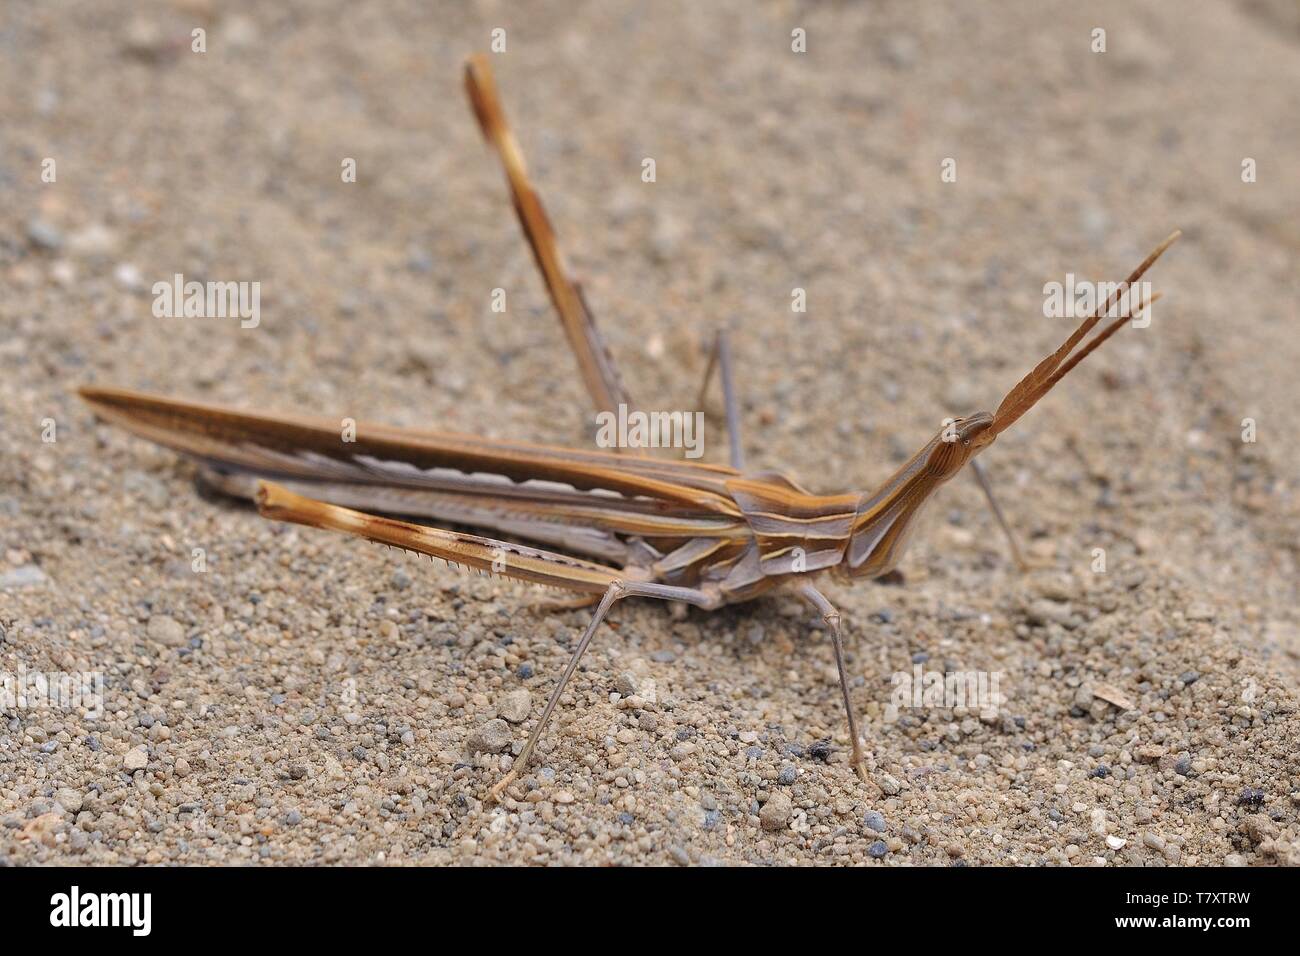 Acrida ungarica - species of grasshopper found in southern and central Europe. Known as the cone-headed grasshopper, nosed grasshopper, or Mediterrane Stock Photo